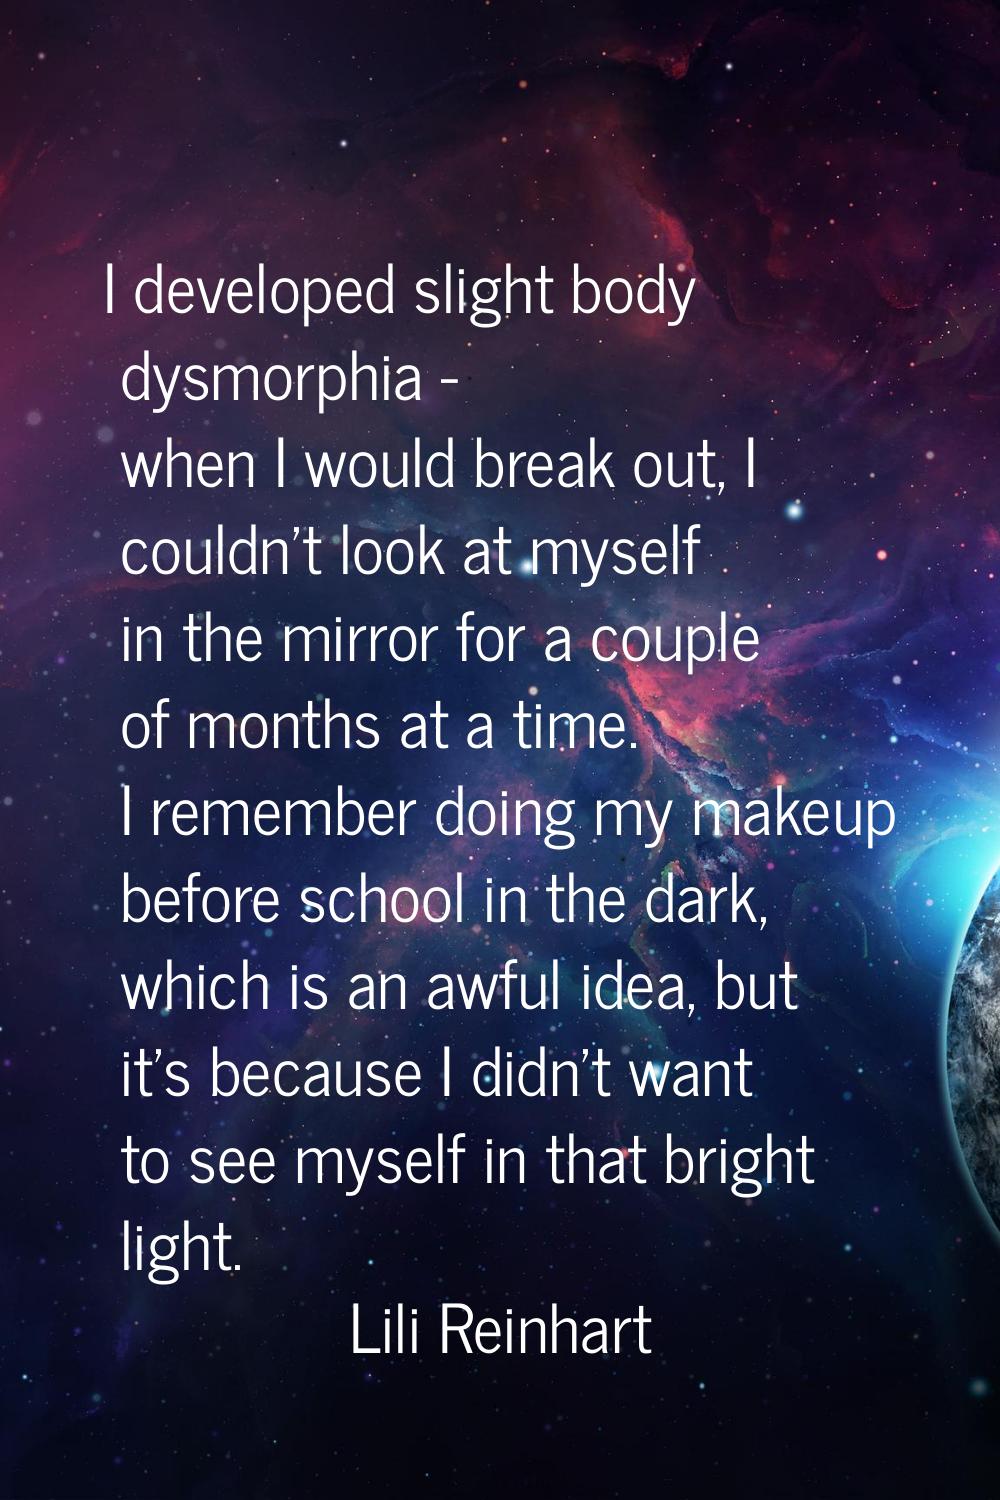 I developed slight body dysmorphia - when I would break out, I couldn't look at myself in the mirro